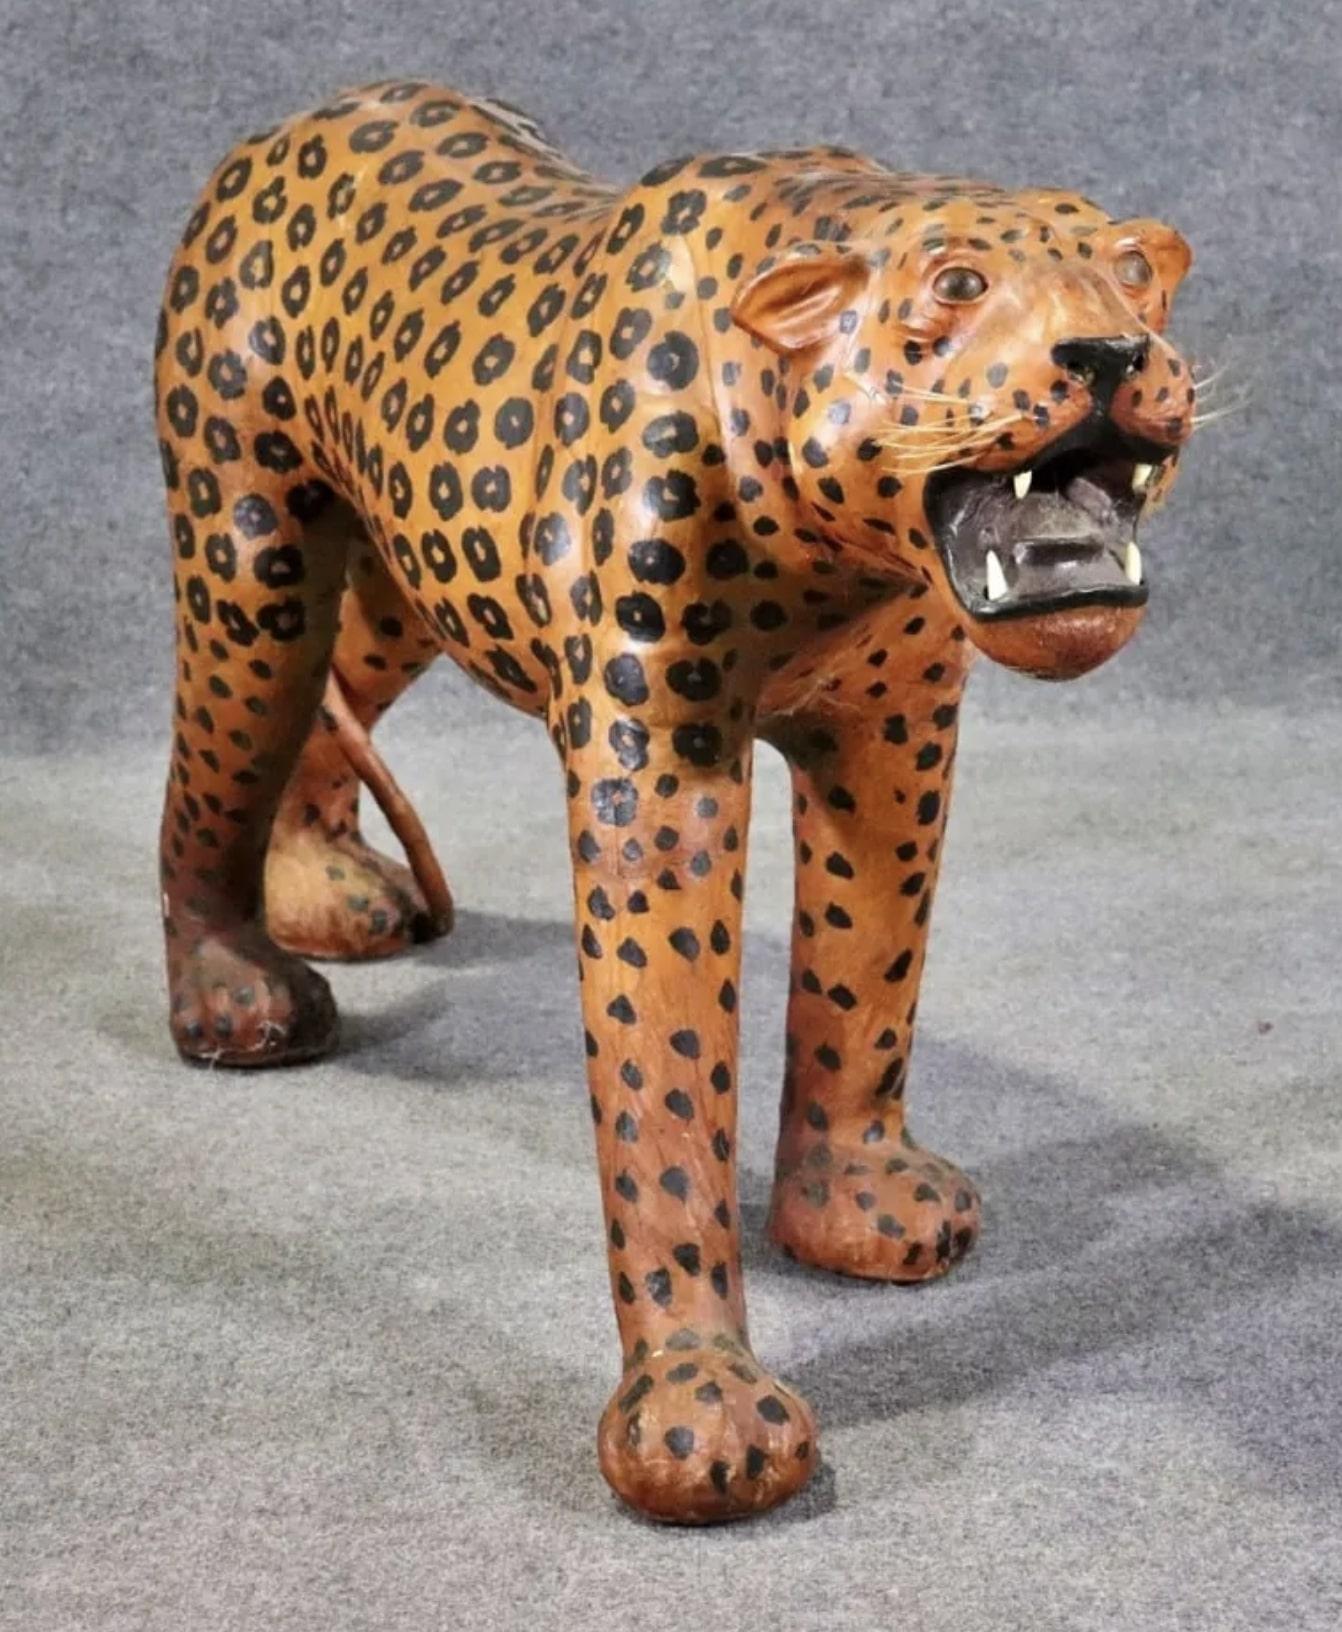 Beautiful standing leopard sculpture in leather. Painted with an orange and black spotted pattern. Great detailing to face and teeth.
Please confirm location NY or NJ